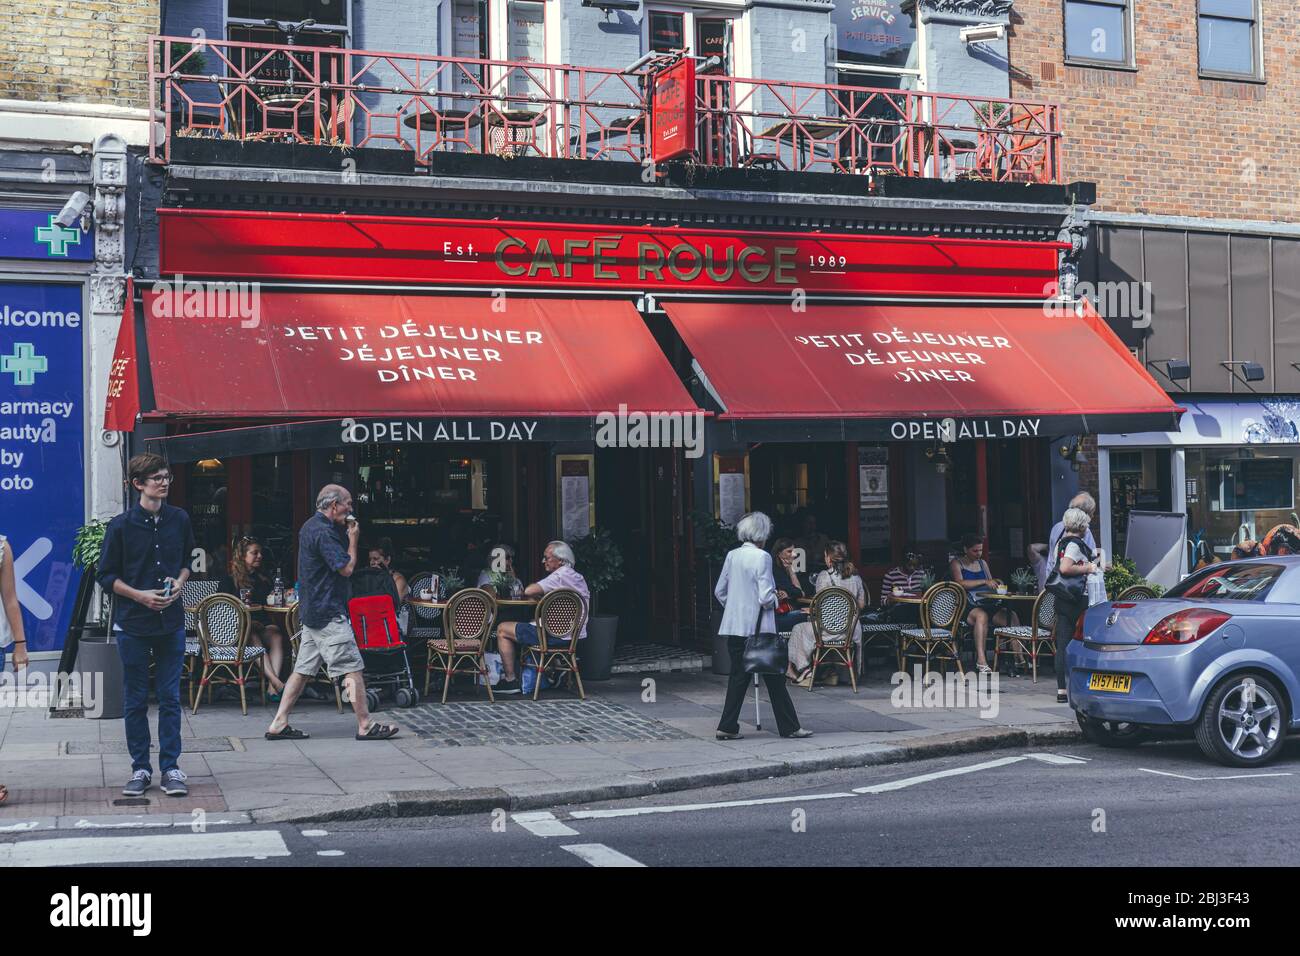 London/UK-1/08/18: people socializing in the outdoor sitting area in Café Rouge on Hampstead High Street, a Parisienne bistro-style cafe Stock Photo